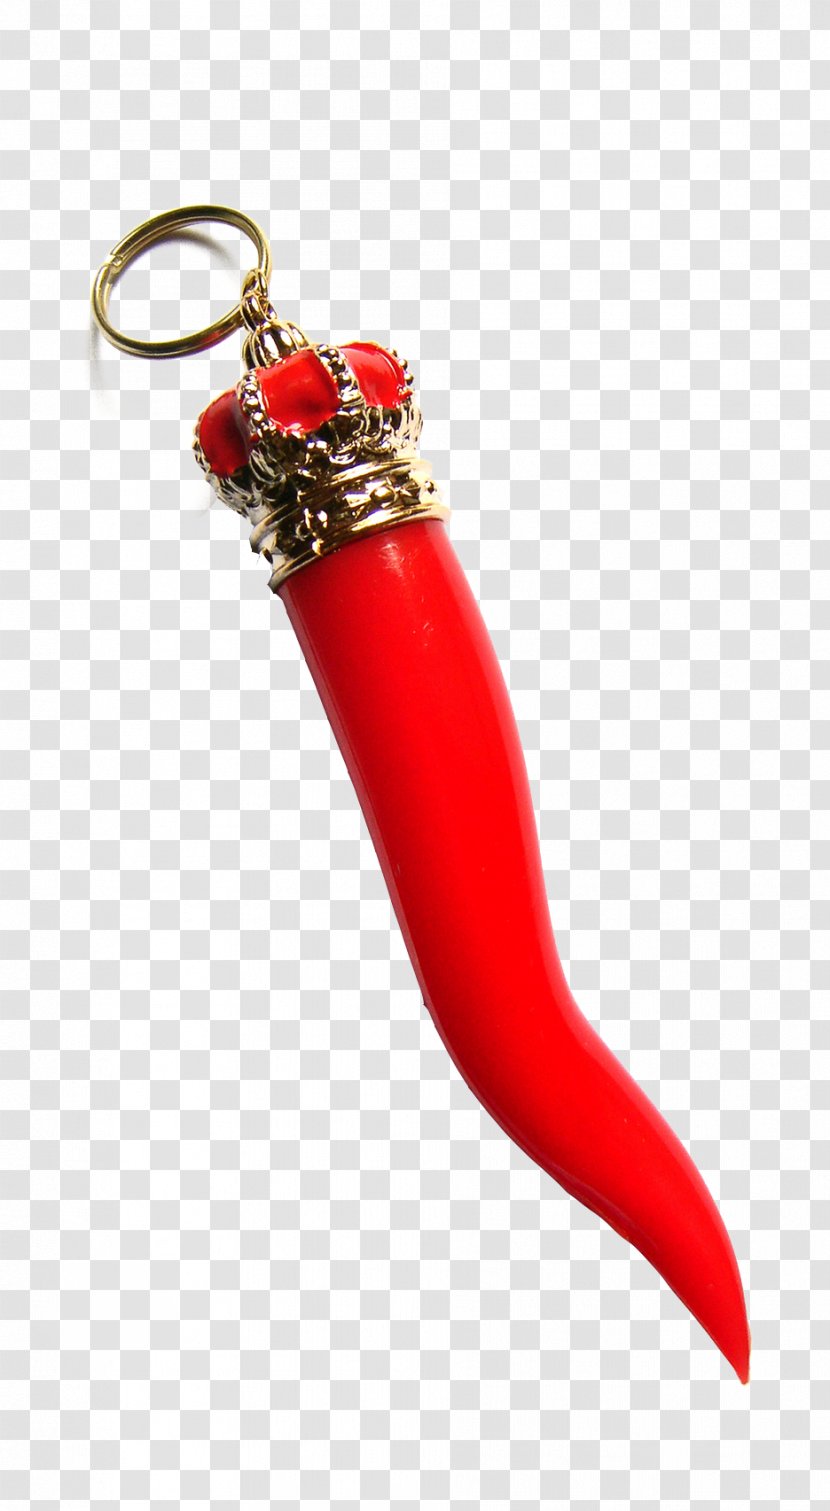 Chili Con Carne Pepper Cornicello Bell Capsicum - Red Amulet Transparent PNG